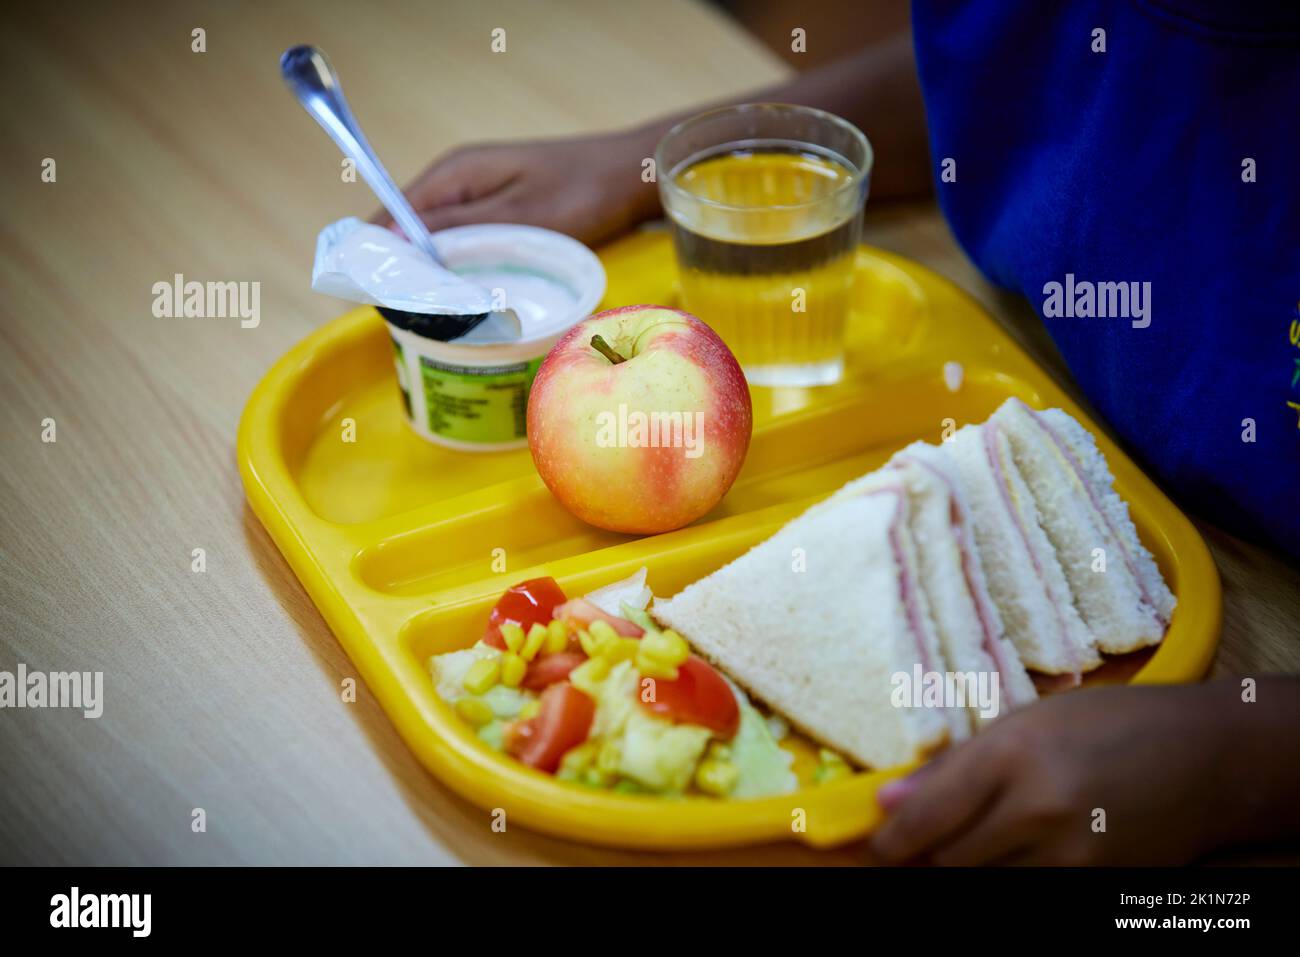 School meal, dinner on a meal try with sandwiches fruit and yogurt Stock Photo